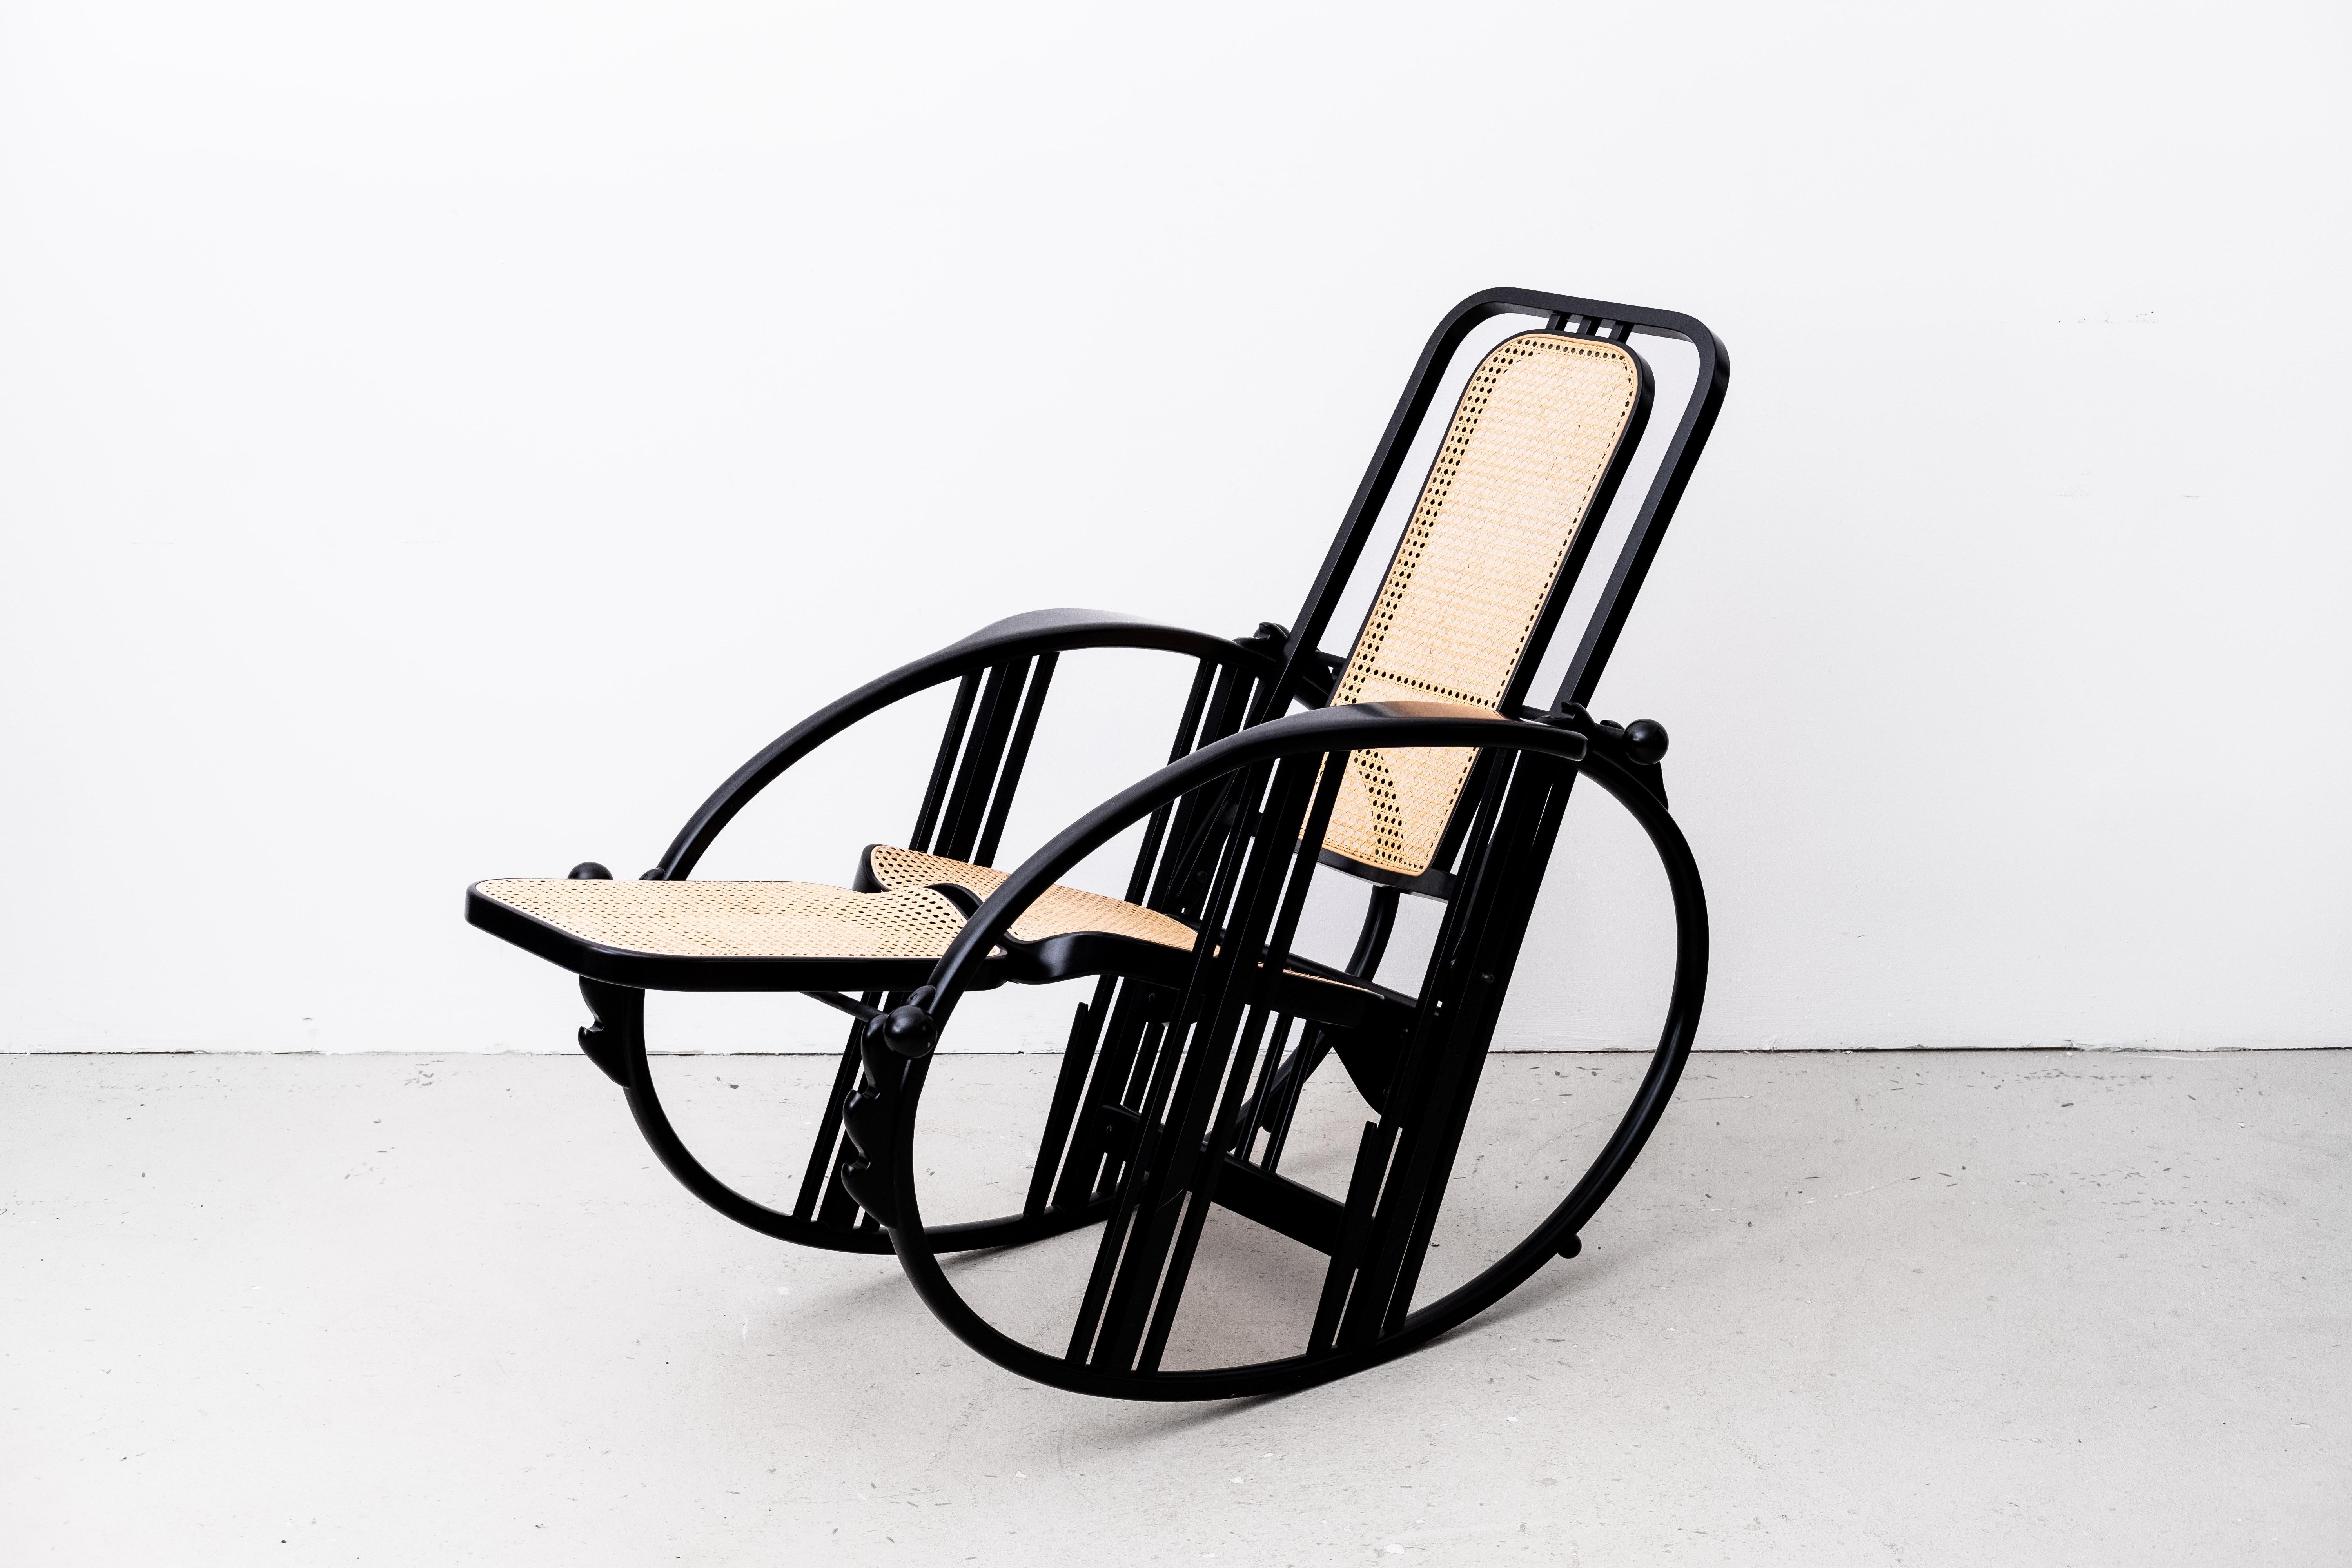 Egg-Rocking Chair by Antonio Volpe (Udine, 1922), ex. by Wittmann (Vienna, 1990) For Sale 10